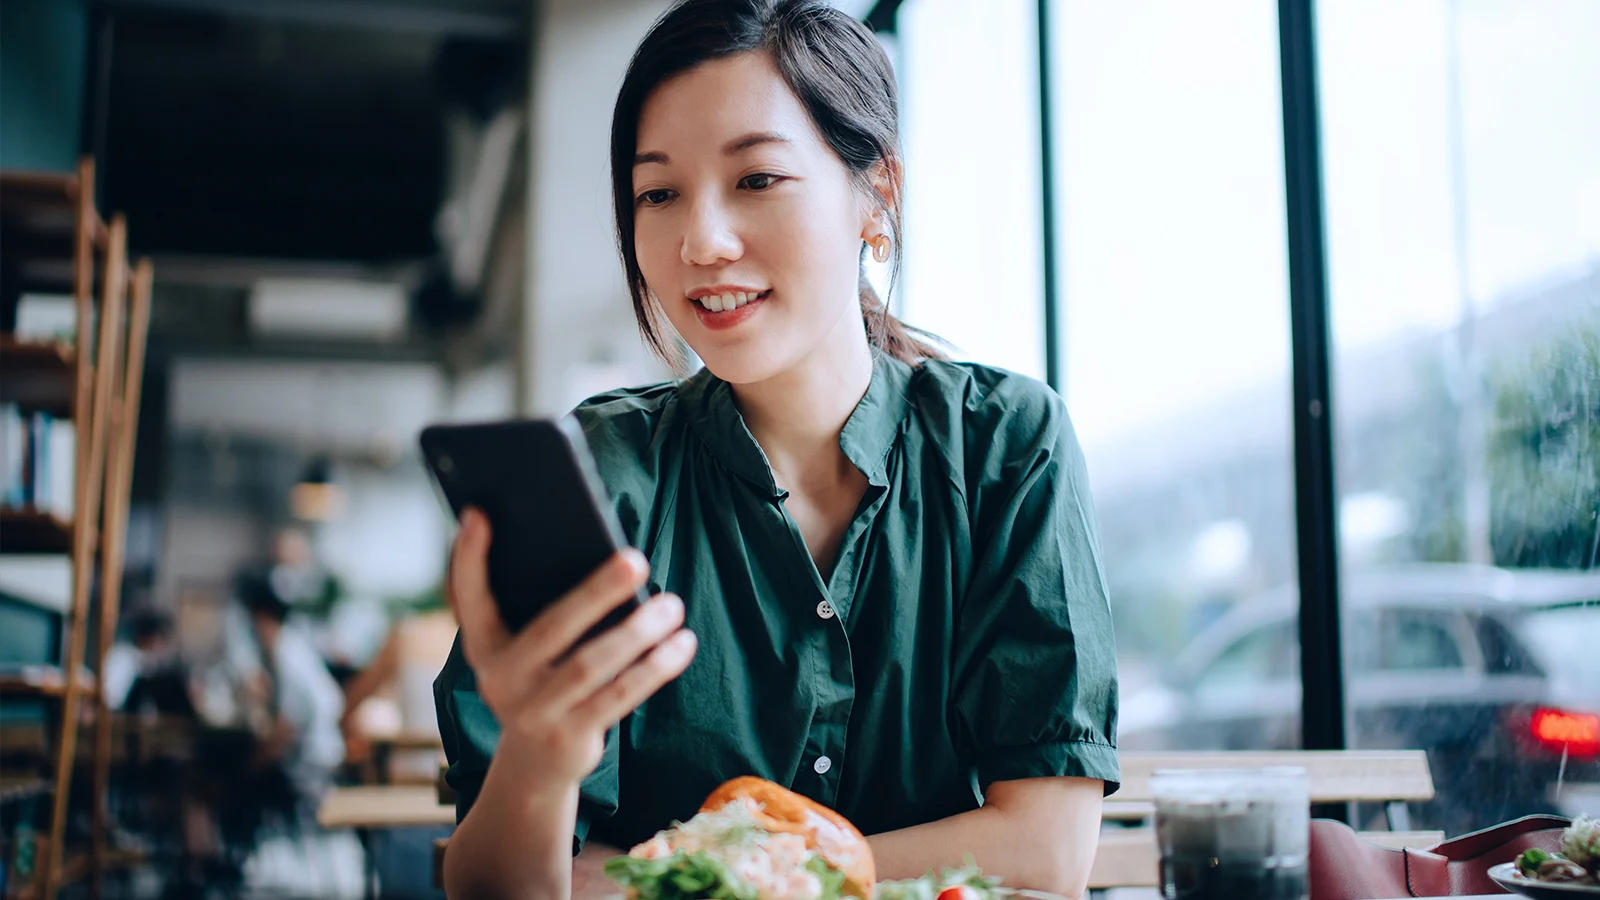 Young woman on smartphone while sitting in cafe having lunch